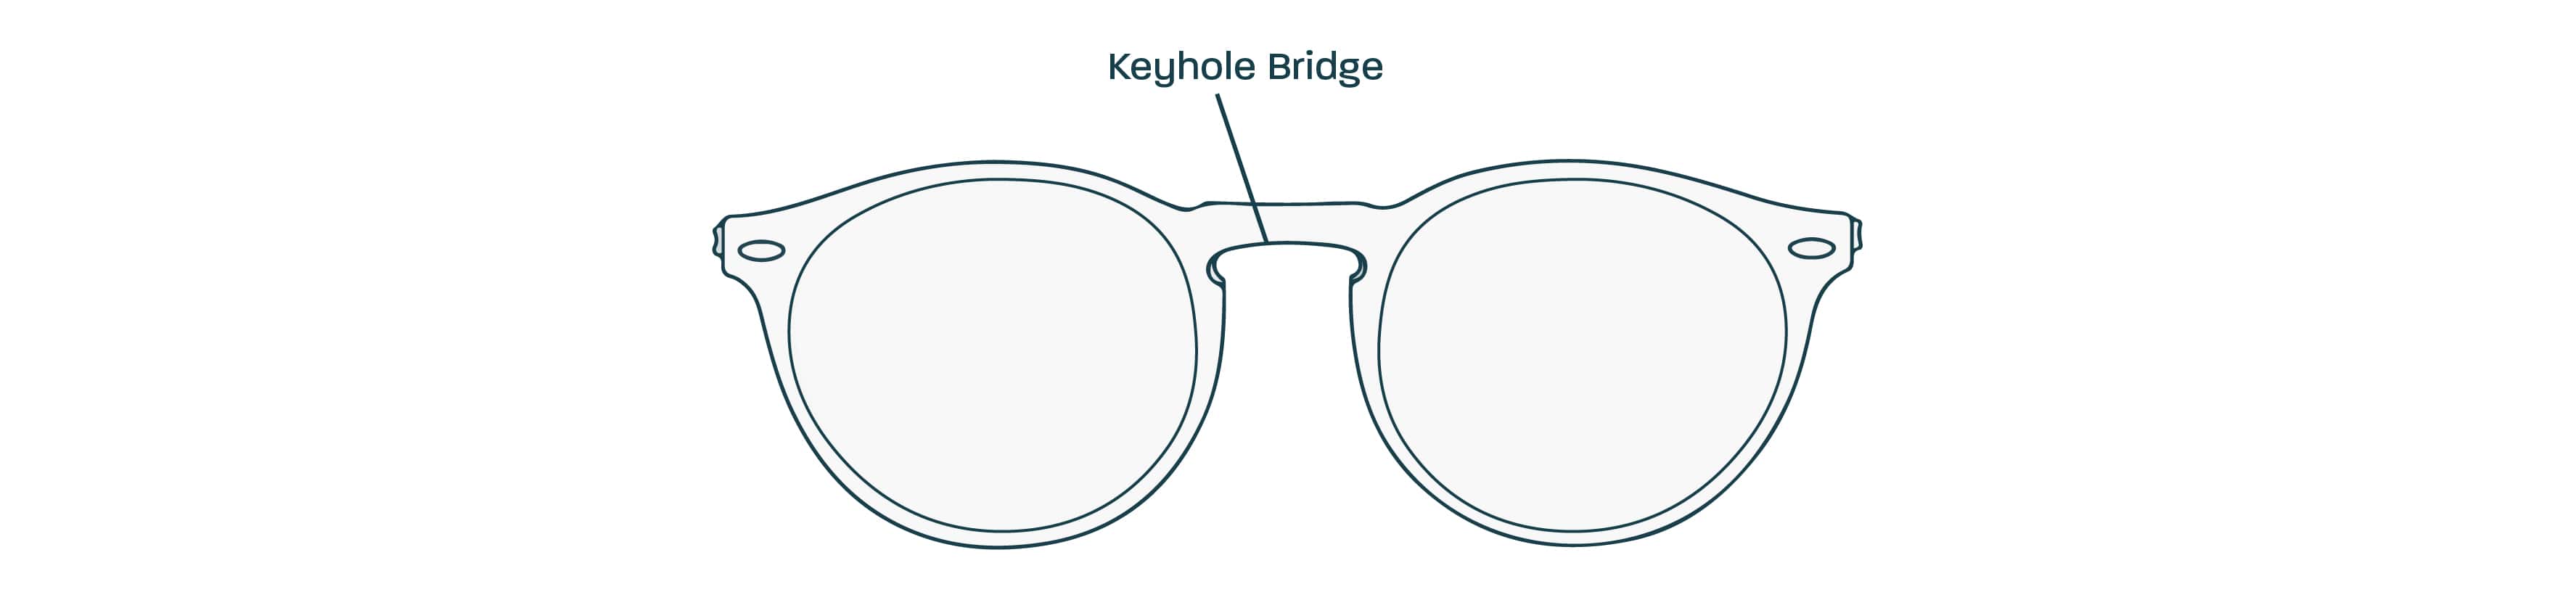 Drawing of a frame with a keyhole bridge